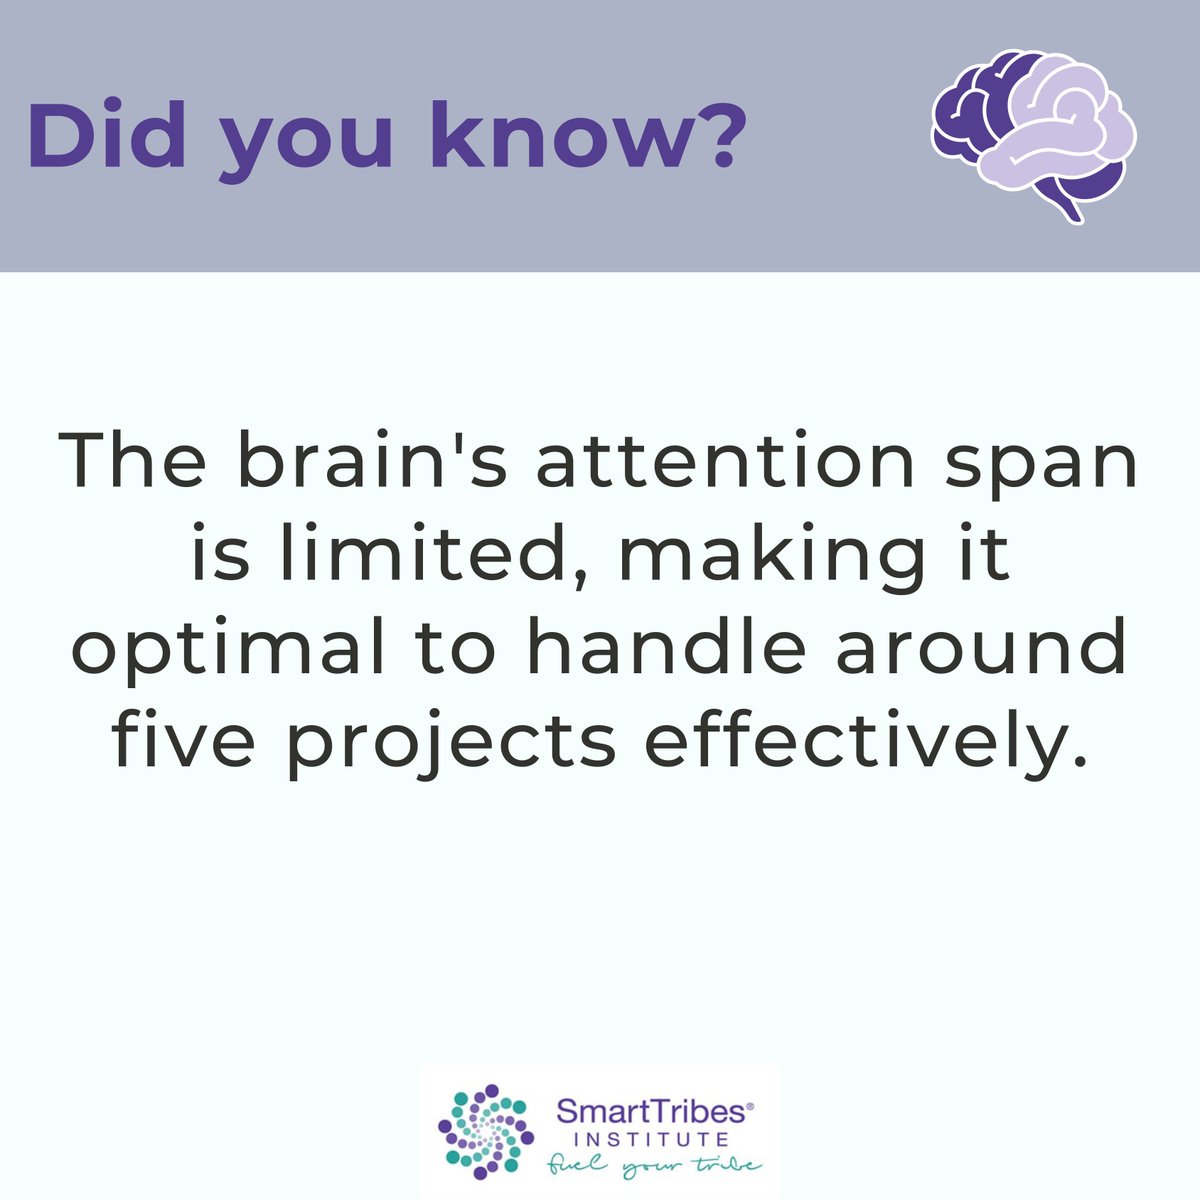 It's fascinating how the brain operates within its attention boundaries, allowing us to manage multiple tasks effectively, with five projects being the sweet spot for peak performance. By respecting these cognitive limits, you can cultivate a more mindful approach to work.